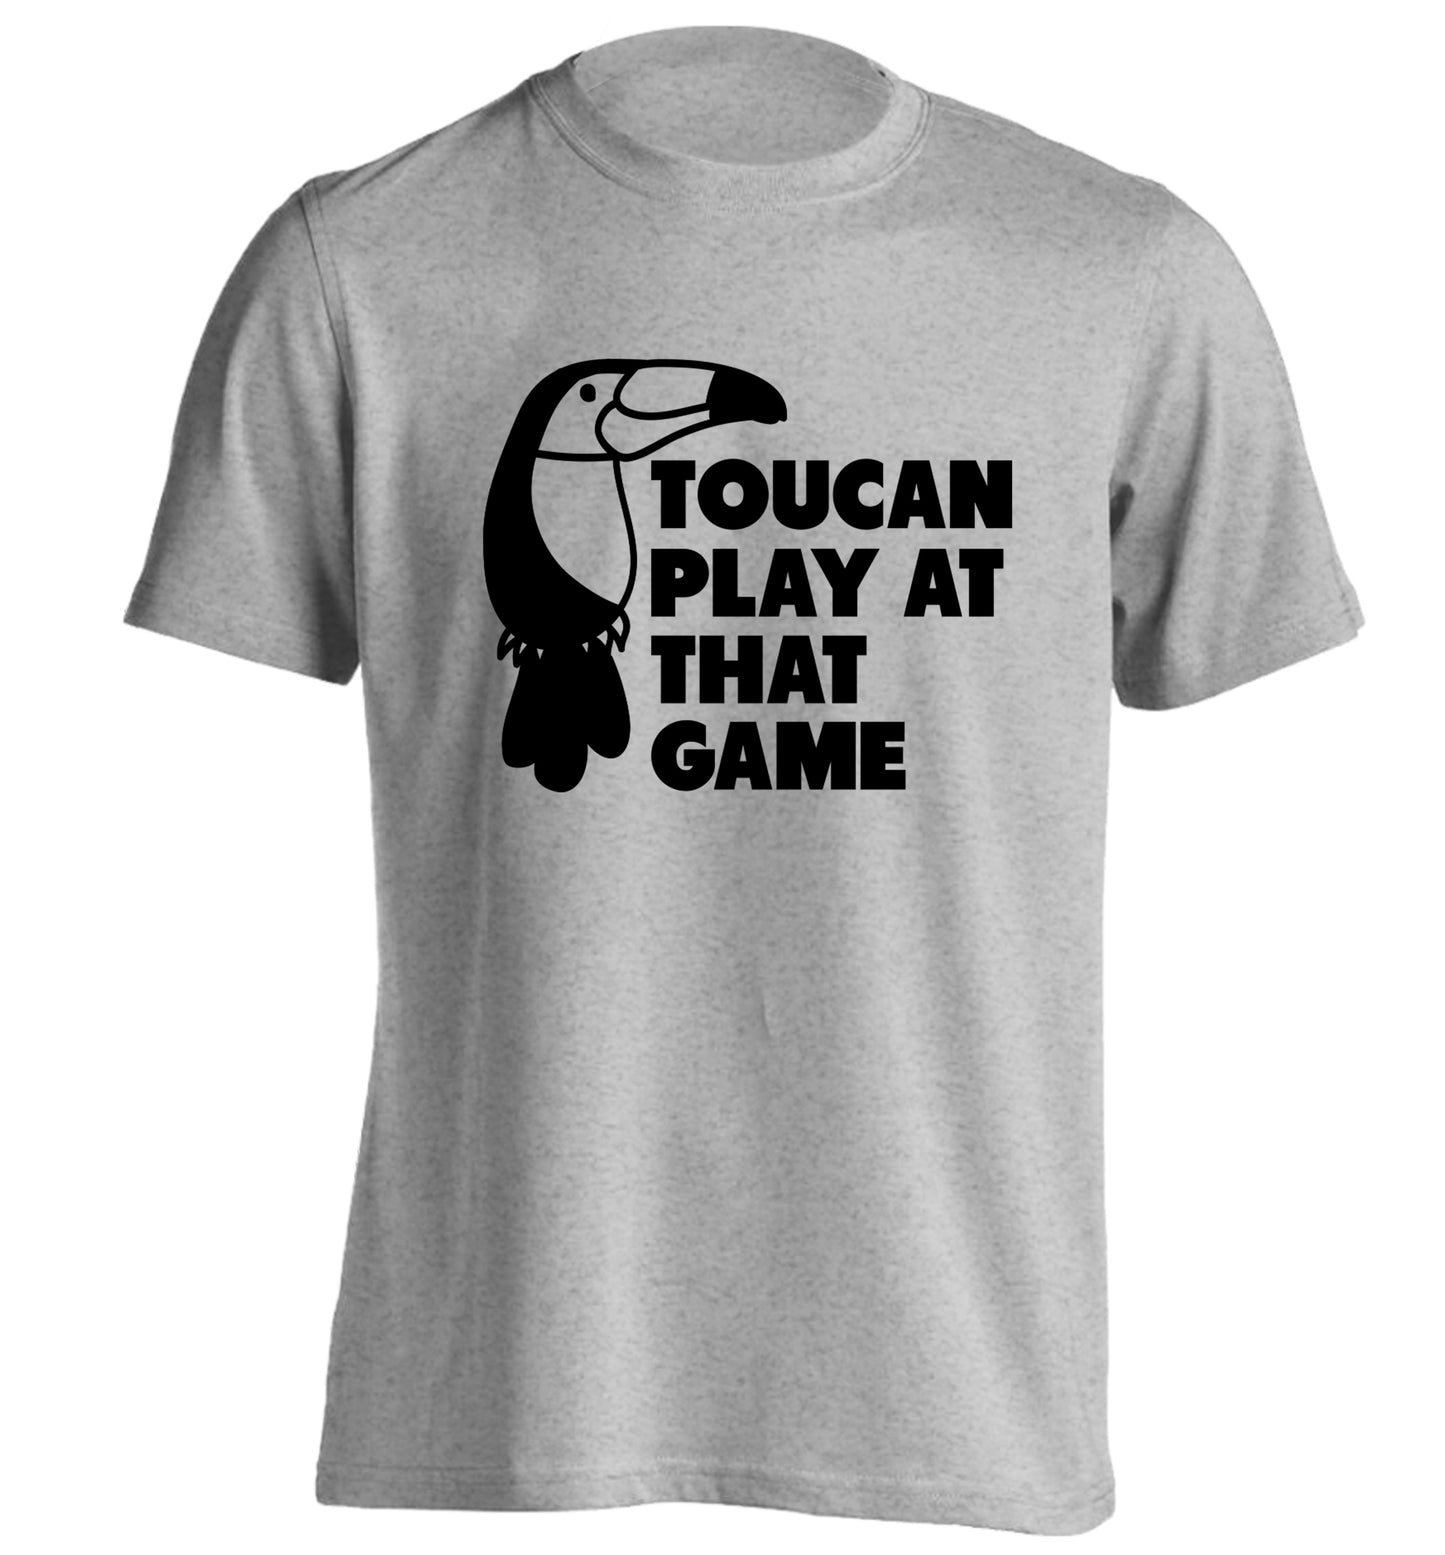 Toucan play at that game adults unisex grey Tshirt 2XL